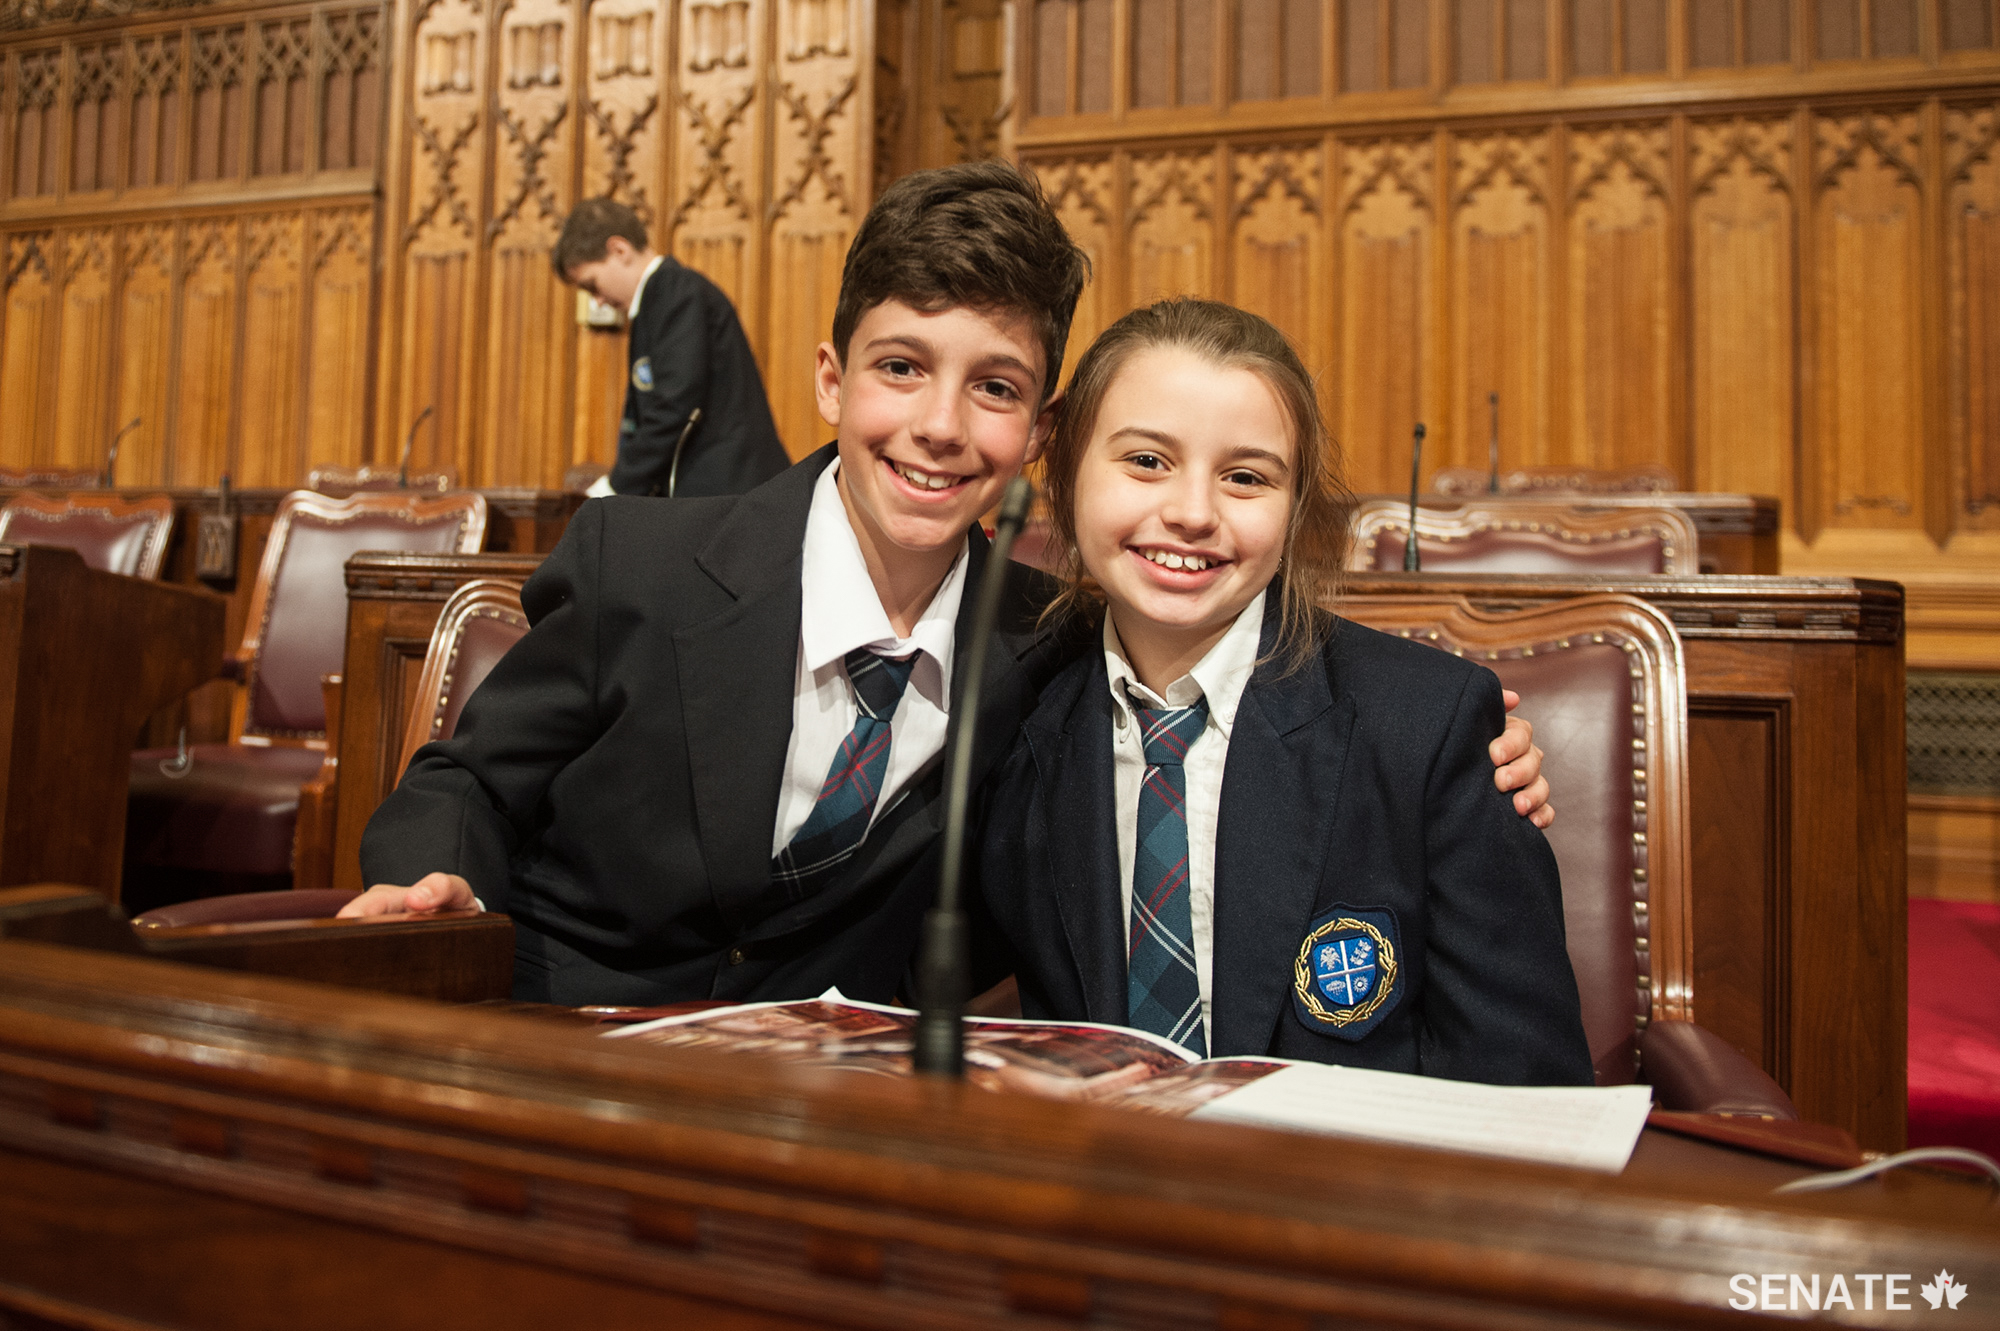 Two students take part in the day's activities at the Senate.